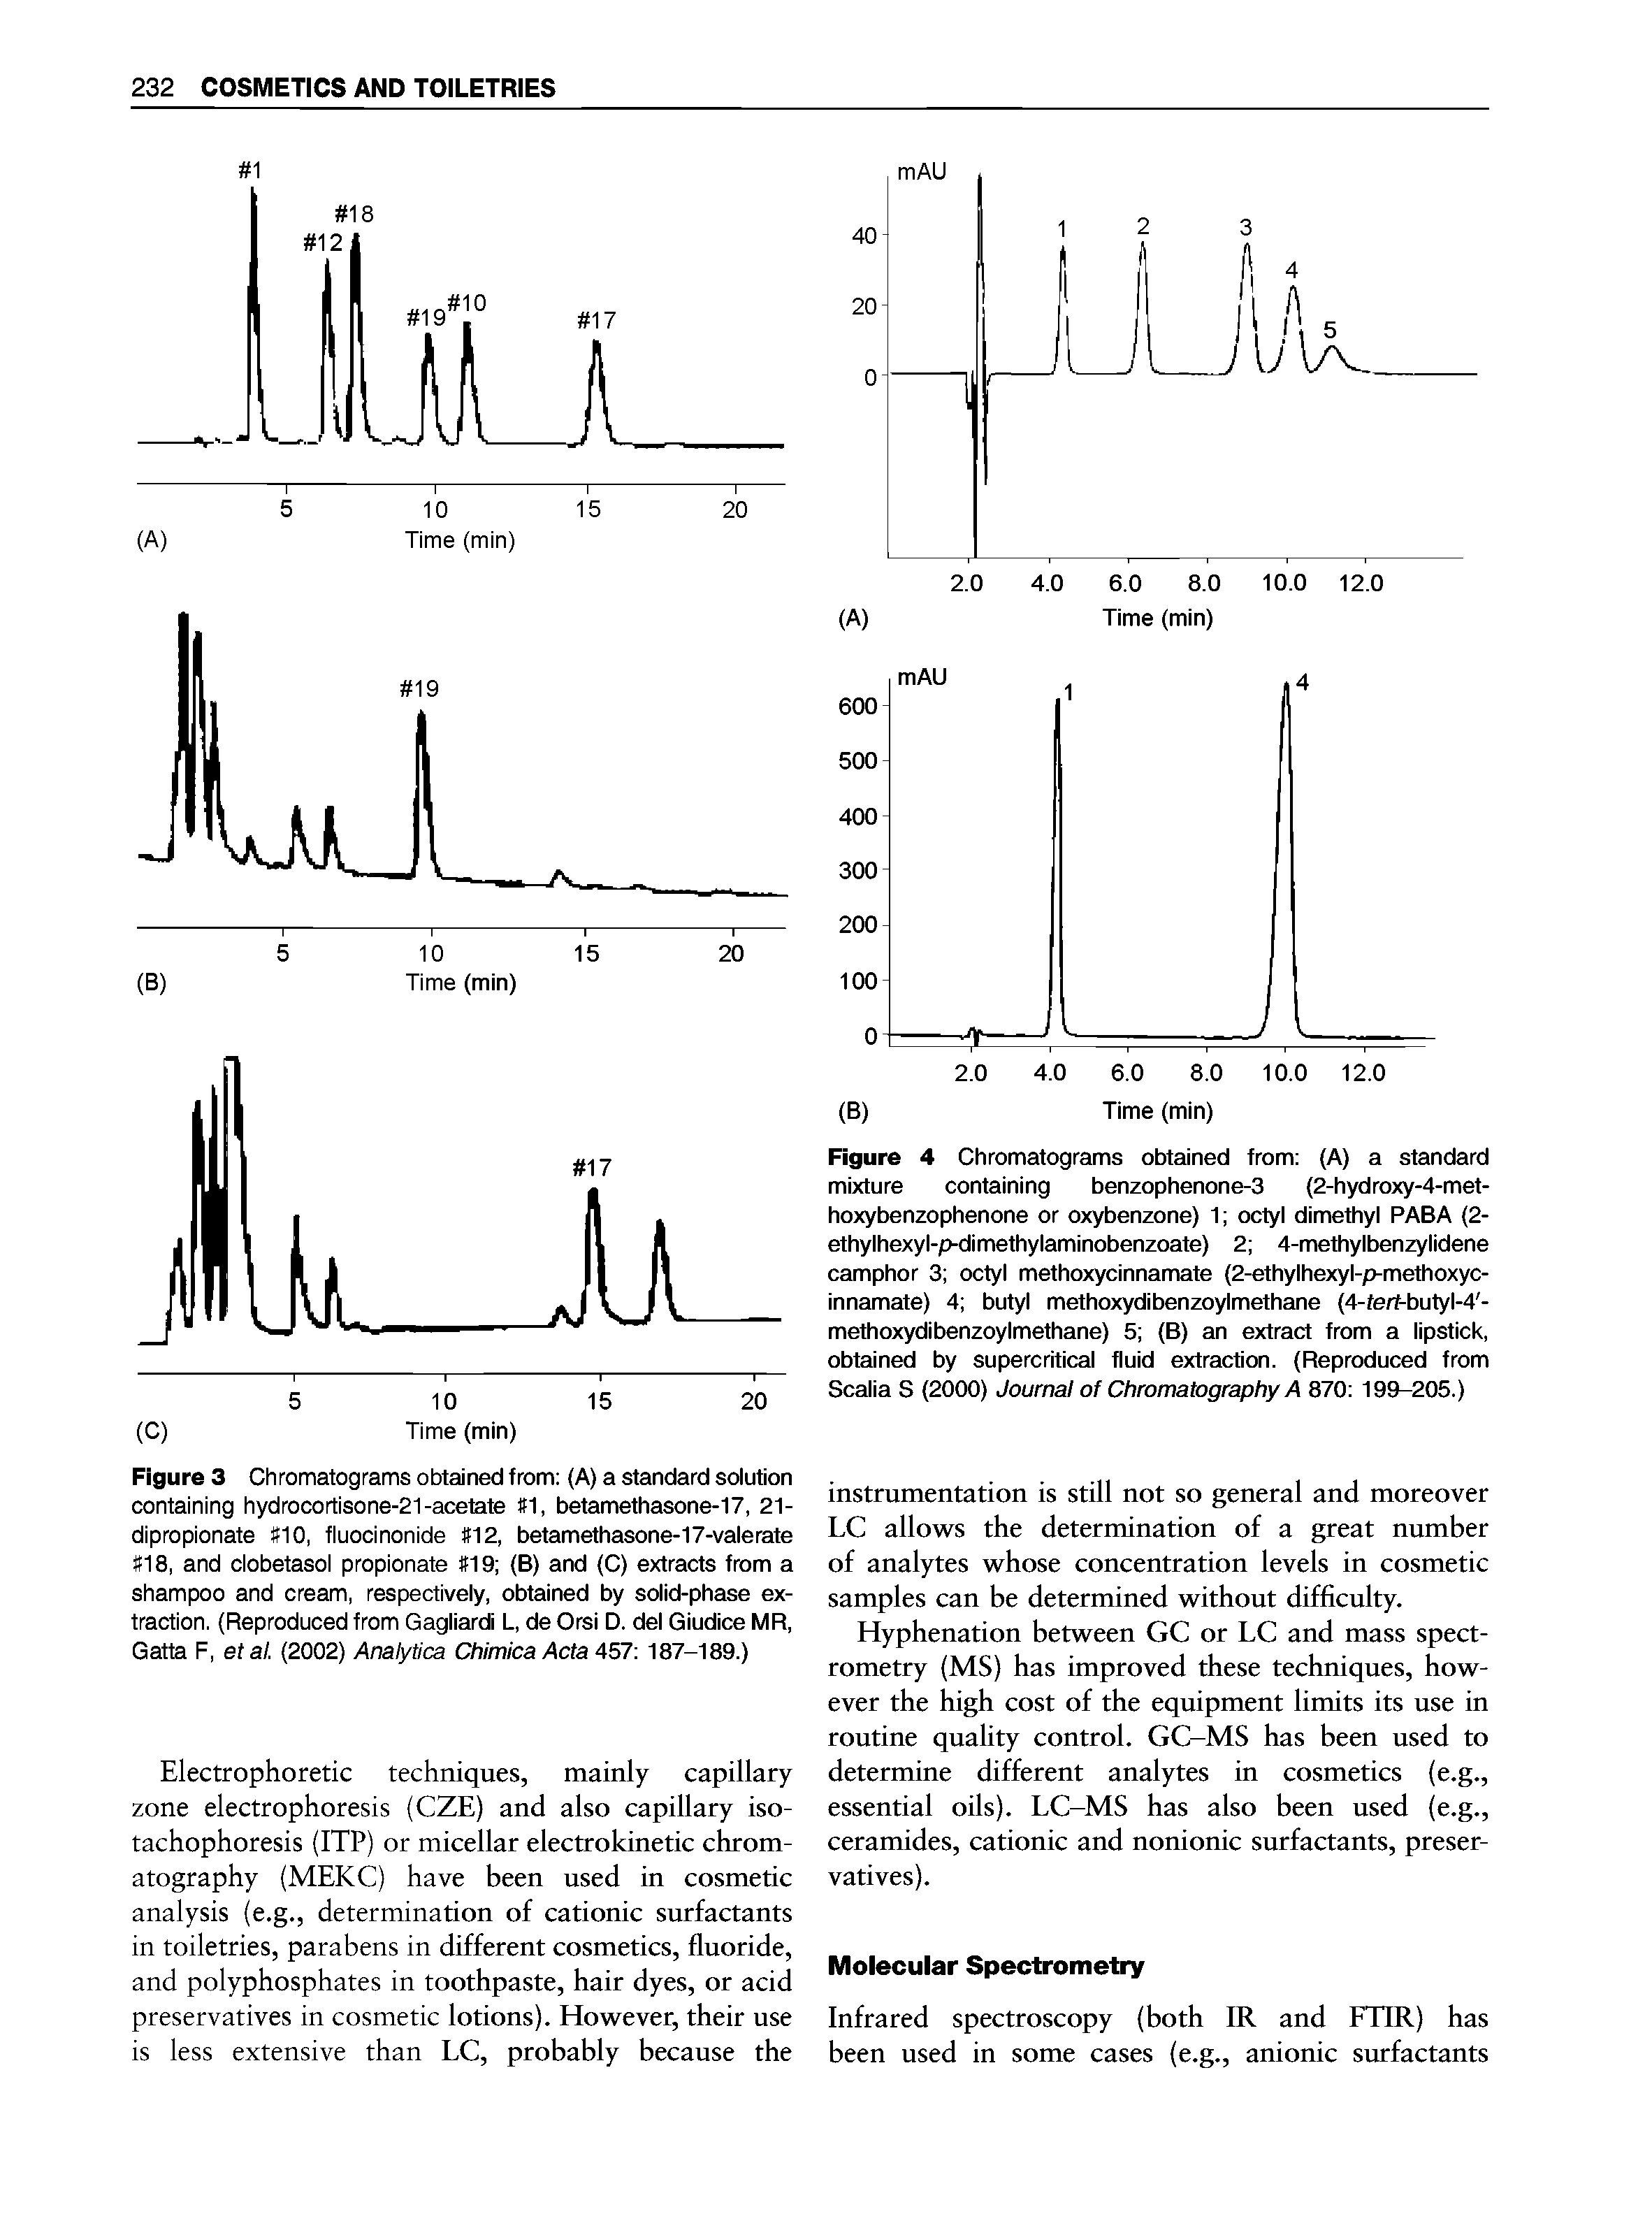 Figure 3 Chromatograms obtained from (A) a standard solution containing hydrocortisone-21-acetate 1, betamethasone-17, 21-dipropionate 10, fluocinonide 12, betamethasone-17-valerate 18, and clobetasol propionate 19 (B) and (C) extracts from a shampoo and cream, respectively, obtained by solid-phase extraction. (Reproduced from Gagliardi L, de Orsi D. del Giudice MR, Gatta F, etal. (2002) Analytica Chimica Acta 4S7 187-189.)...